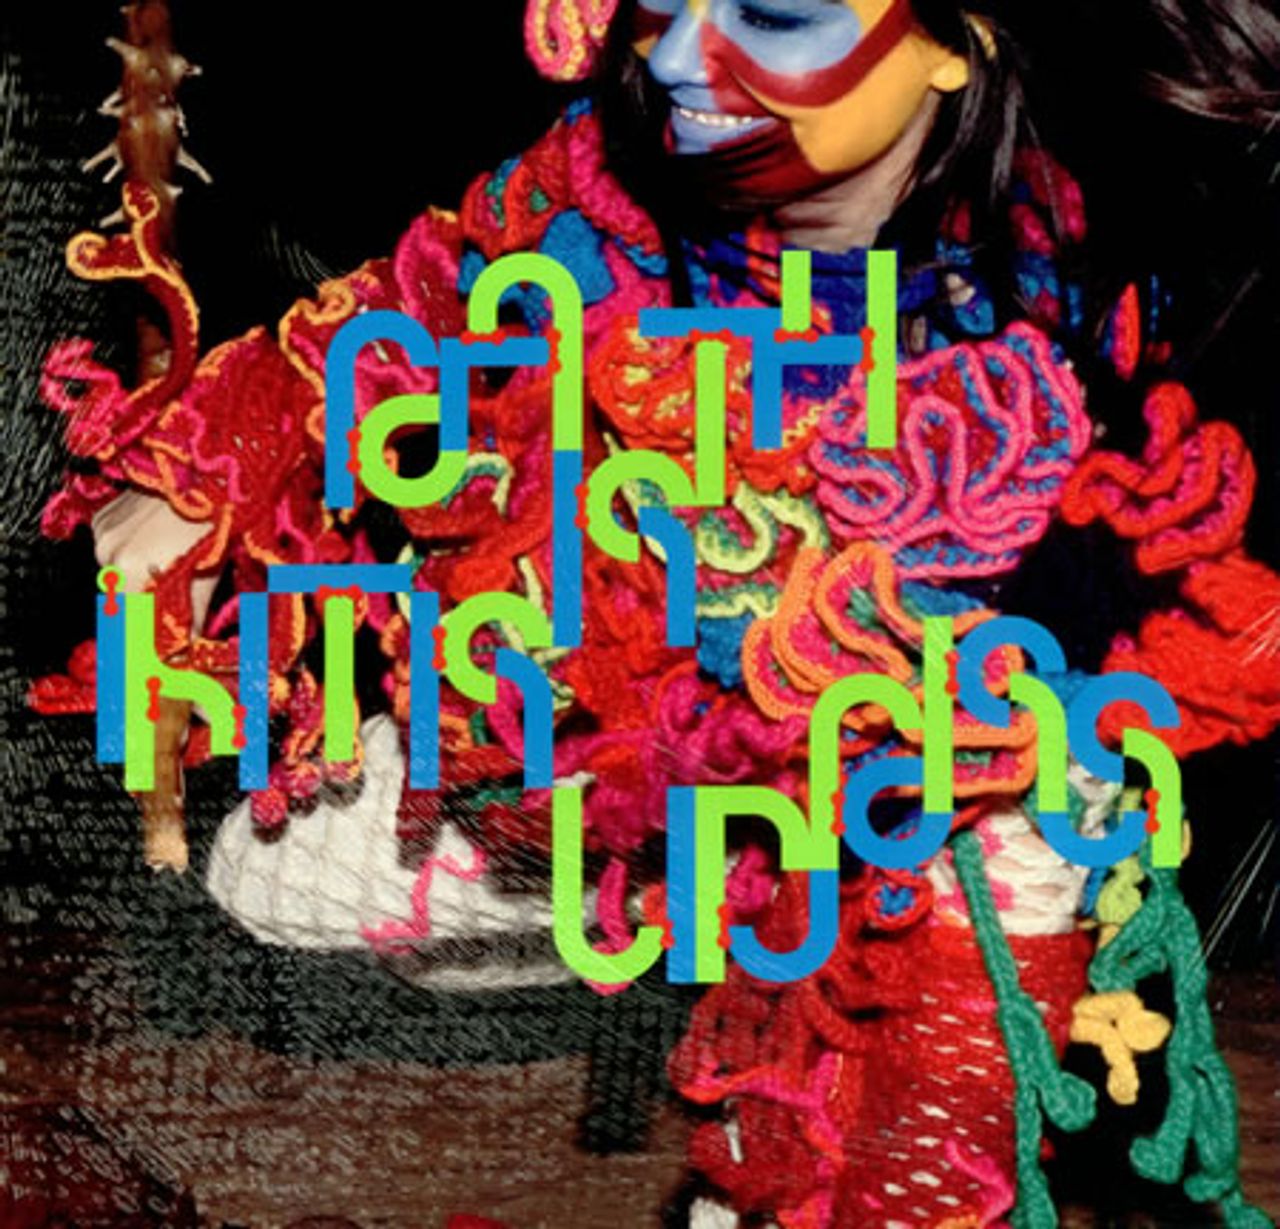 Björk Earth Intruders - Deluxe Limited Edition UK box set 805TP12